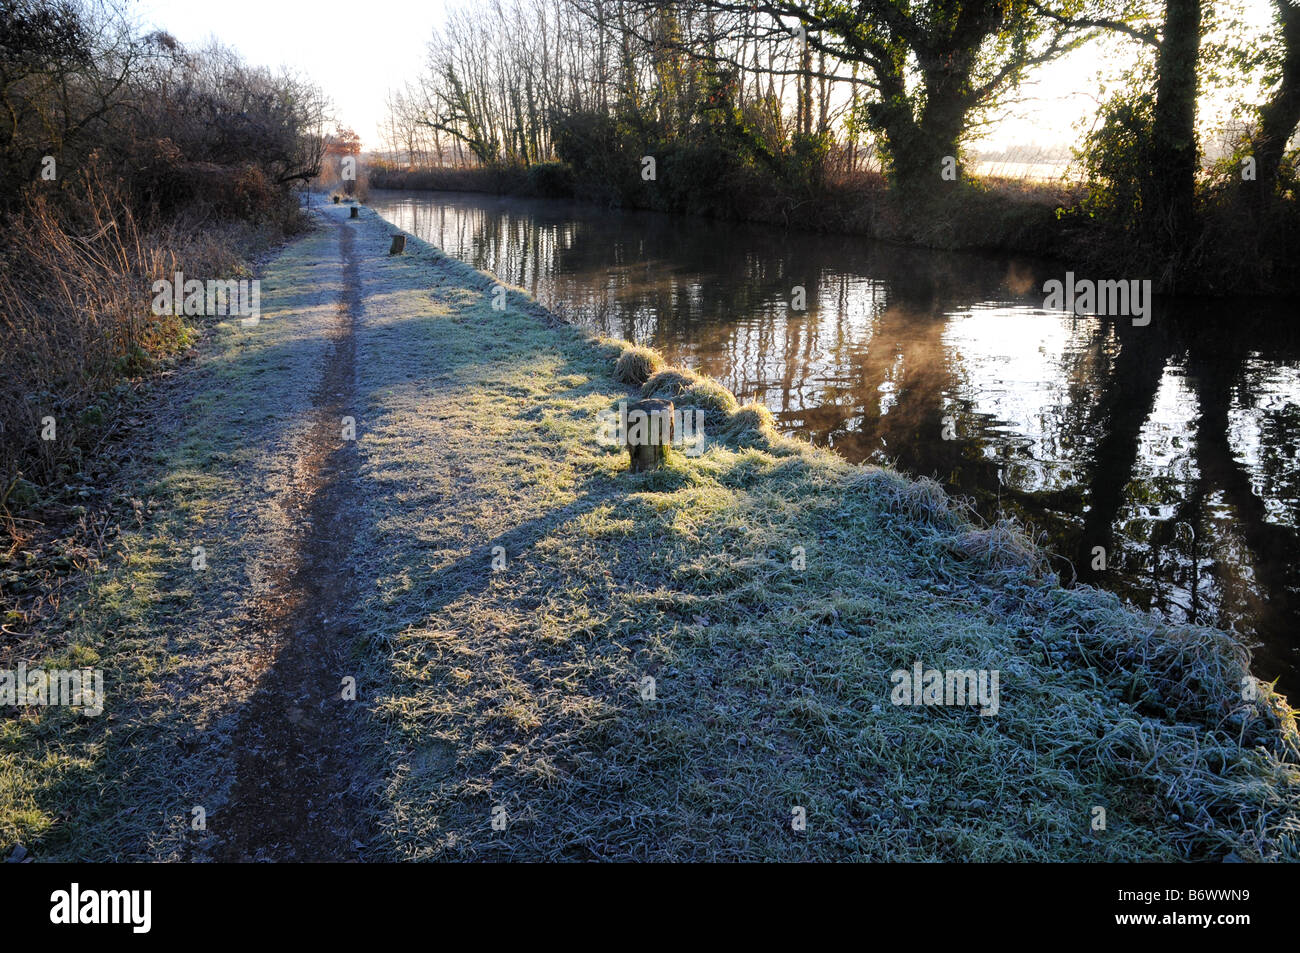 A footpath runs alongside the River Wey Navigation in Surrey England on a cold and frosty winter morning. Stock Photo